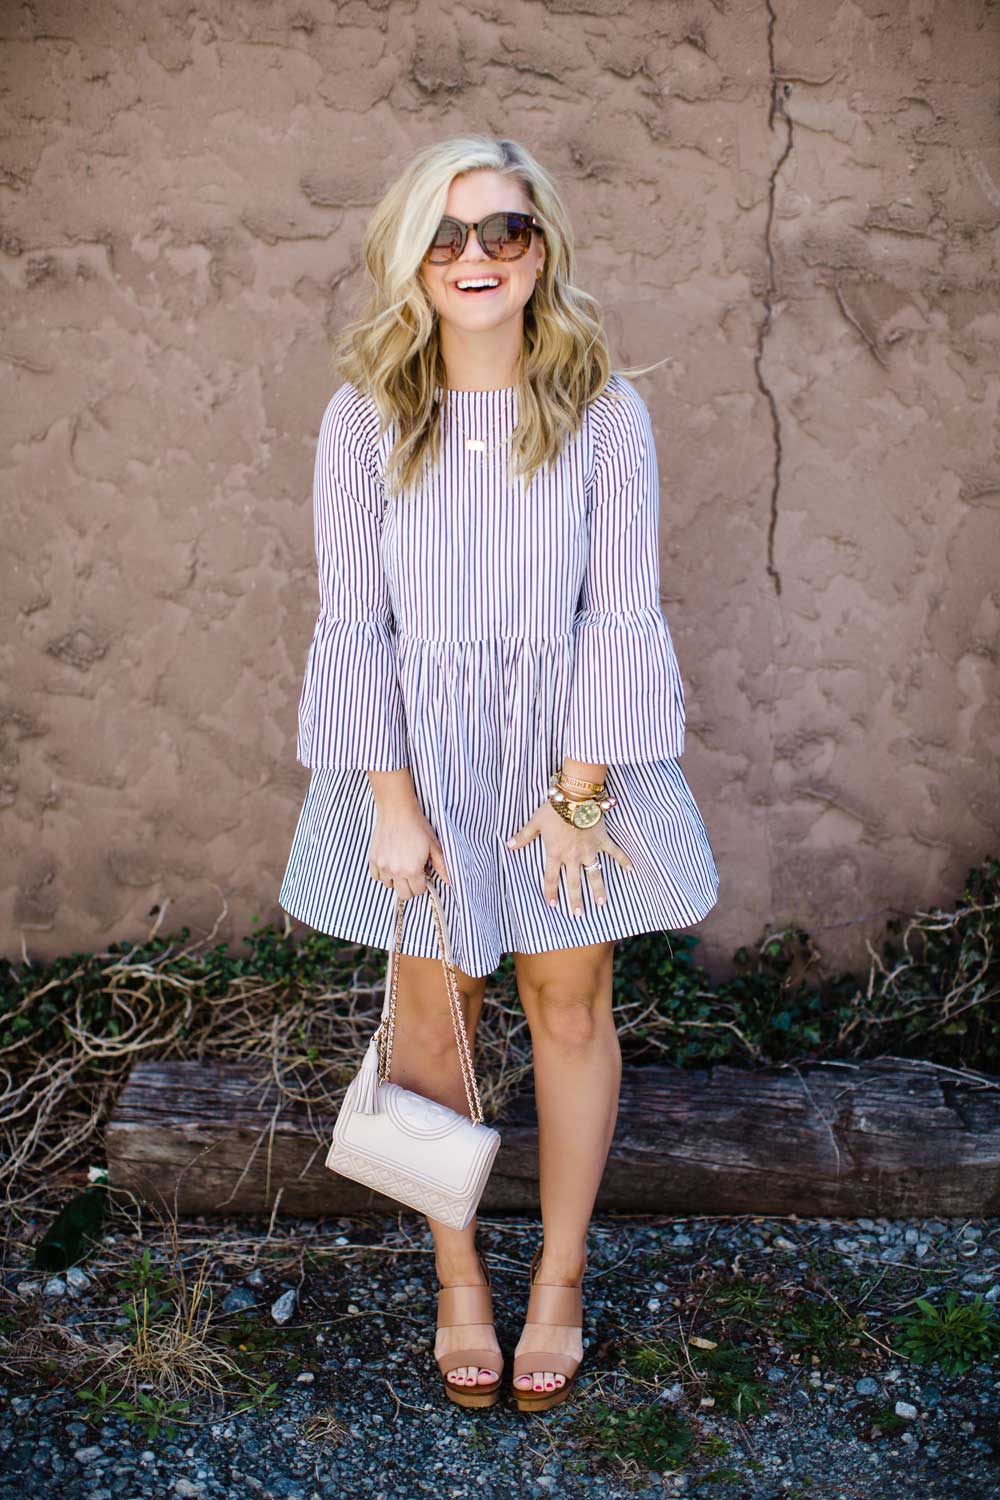 Long sleeve dress, Striped dress, Bell sleeve dress, Spring Dress - Shopbop long sleeve spring dress styled by popular South Carolina fashion blogger, The Southern Style Guide.